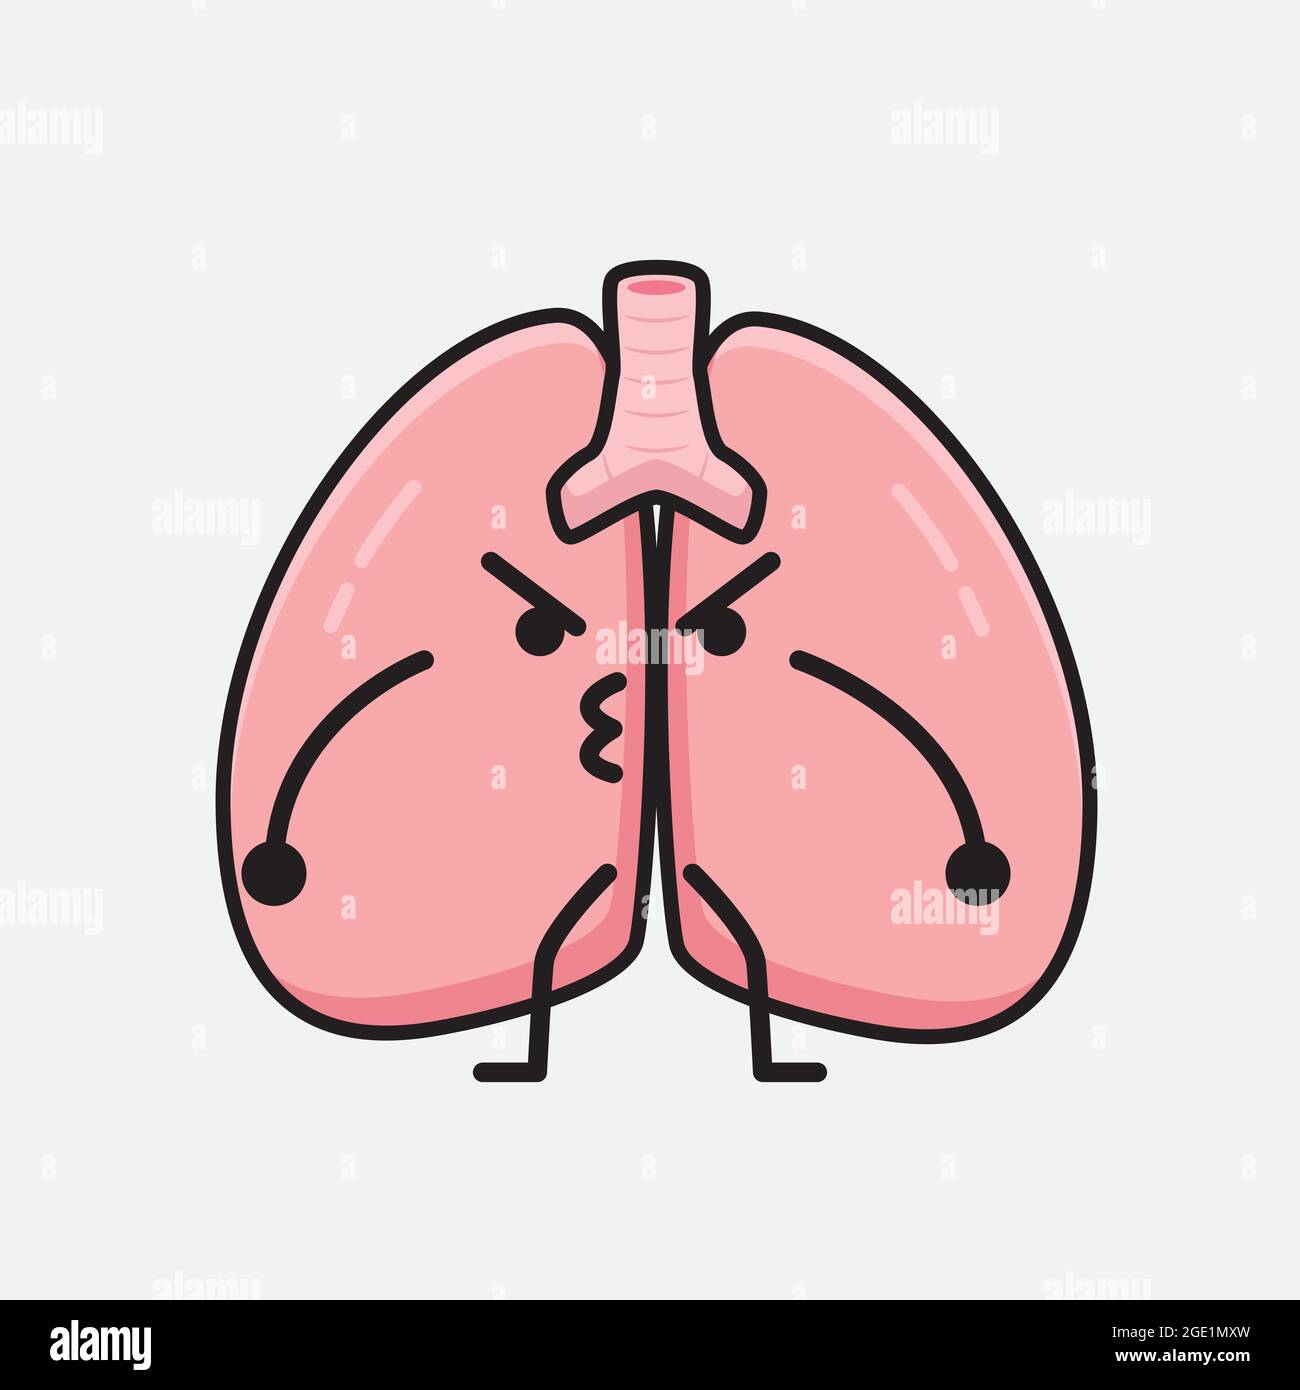 Lungs Diagram - Human Lungs Anatomy